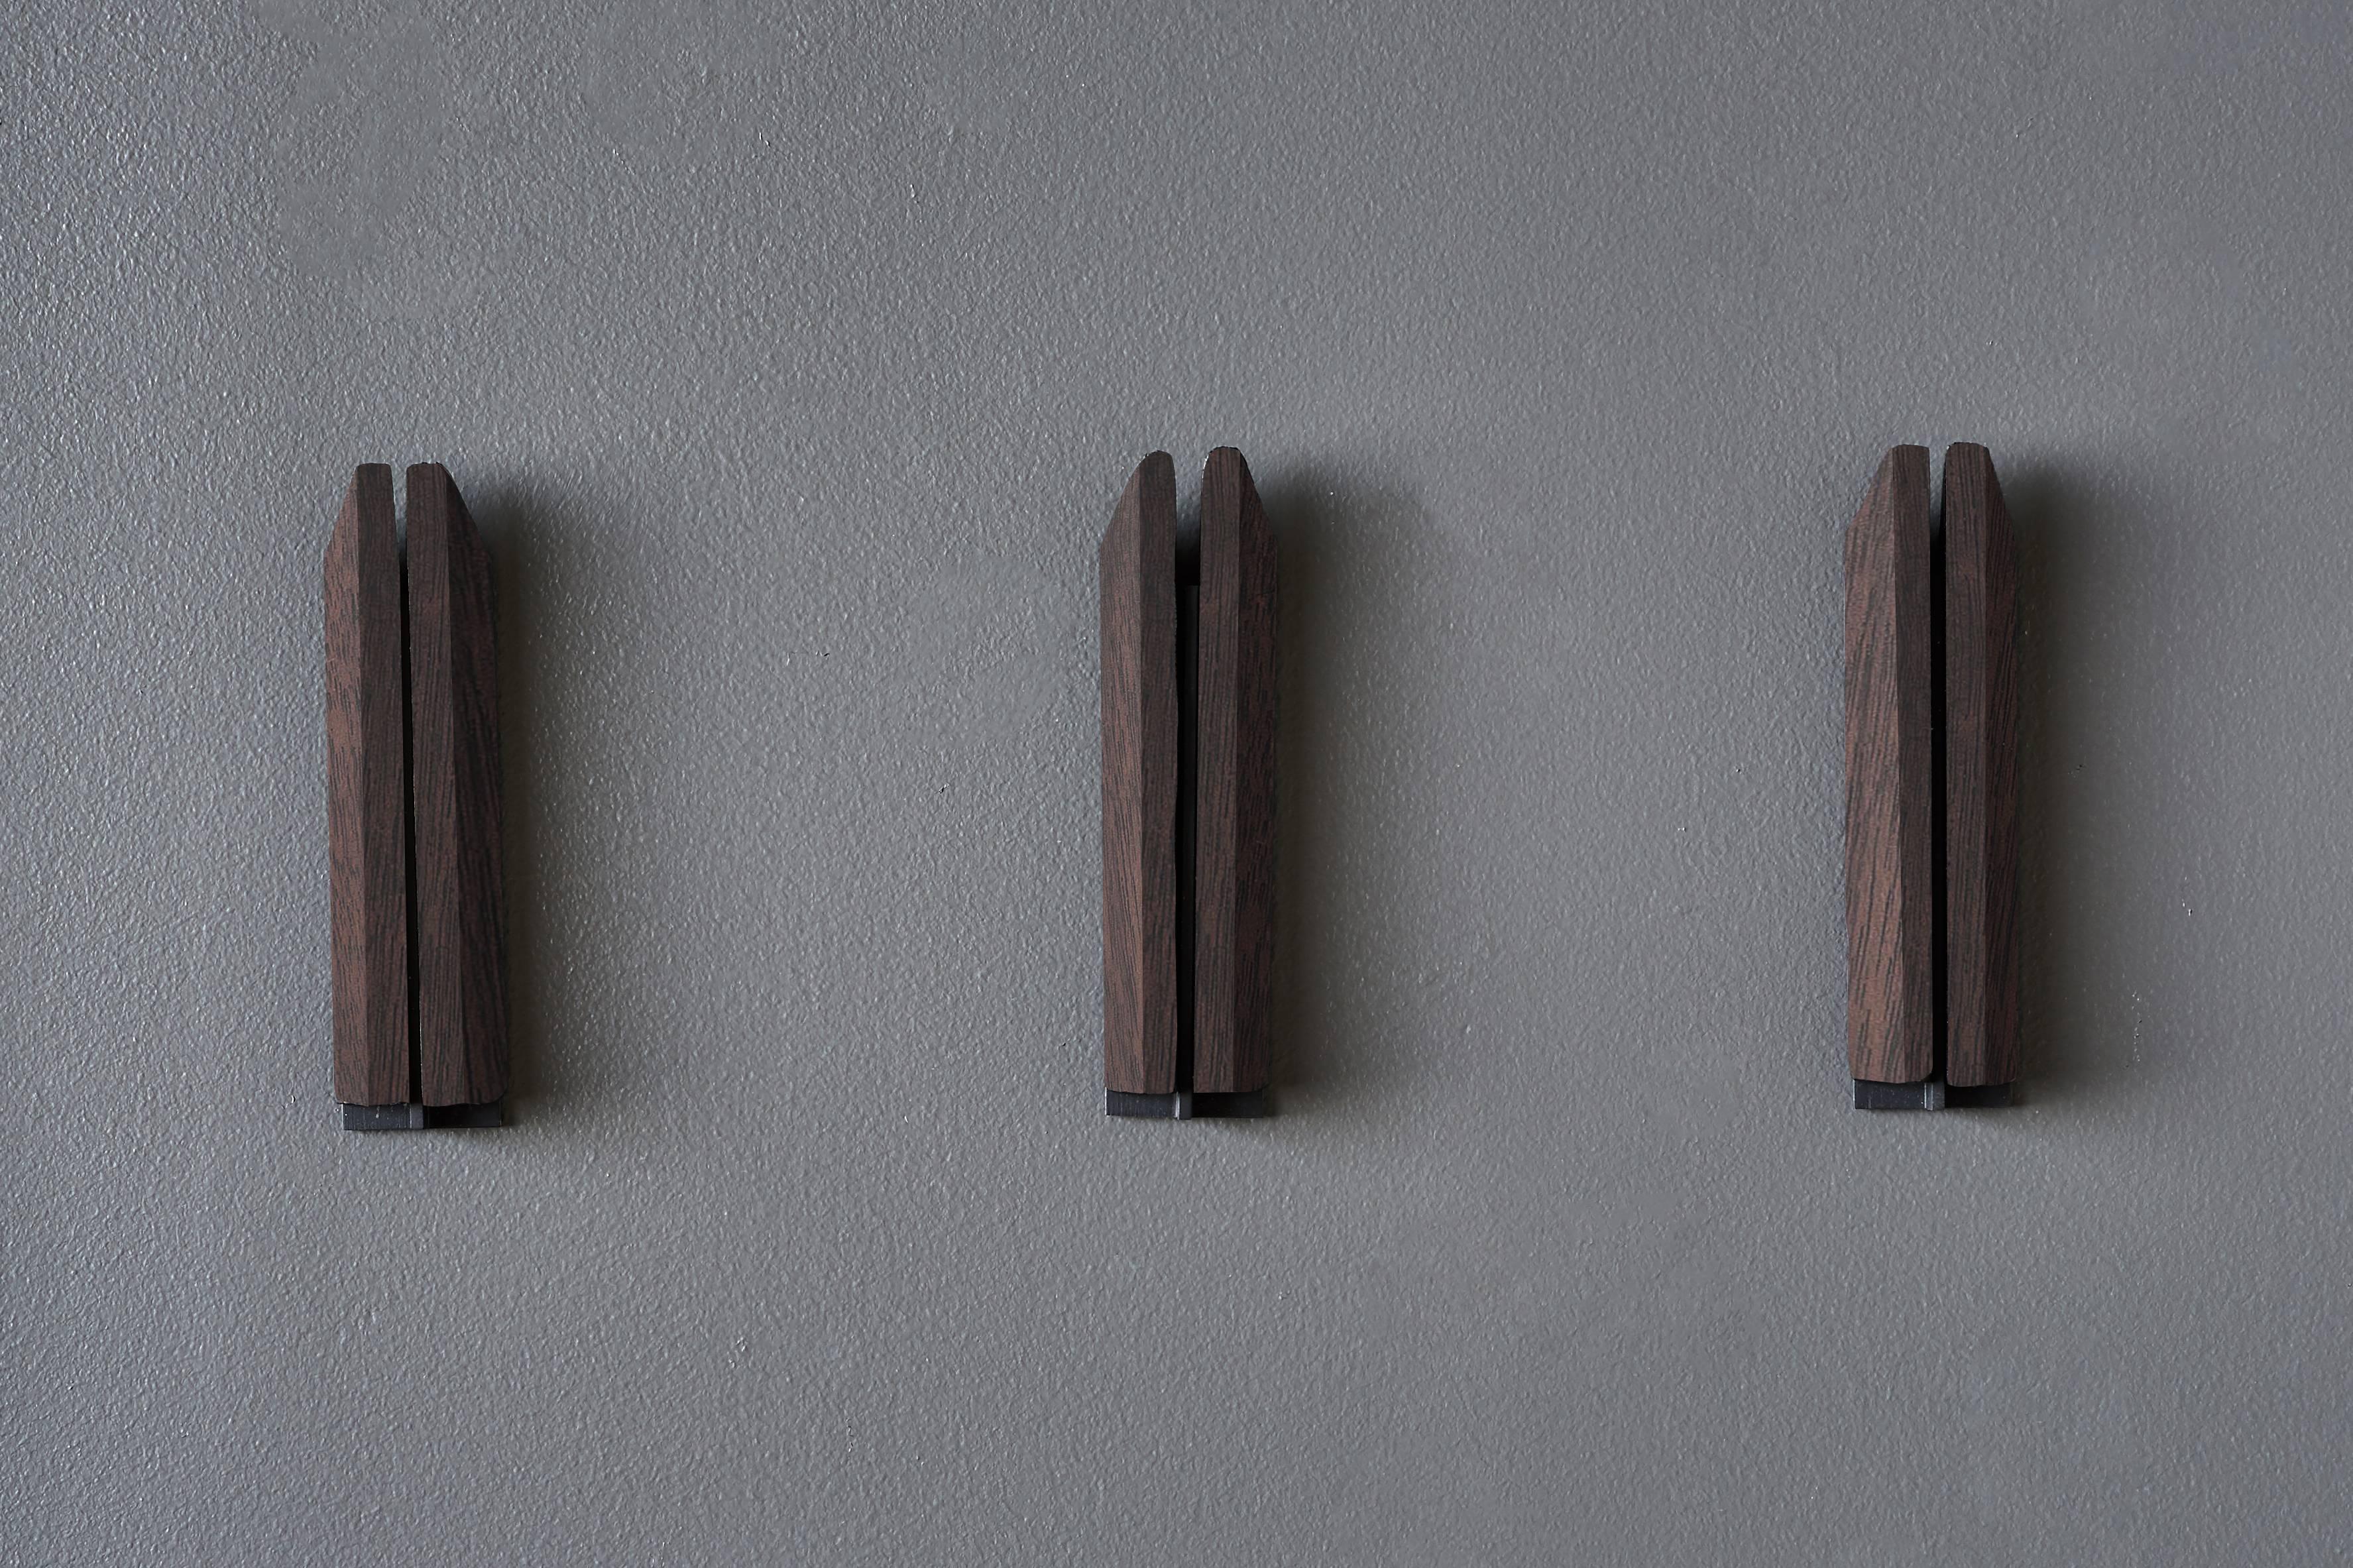 Individually handmade wall hooks in US sourced wood. (set of three)

Shown in Burnt Steel and Black Walnut.
1in x 1in x 6.25in H

Each Desiron piece is fully customizable and available in a variety of finishes.